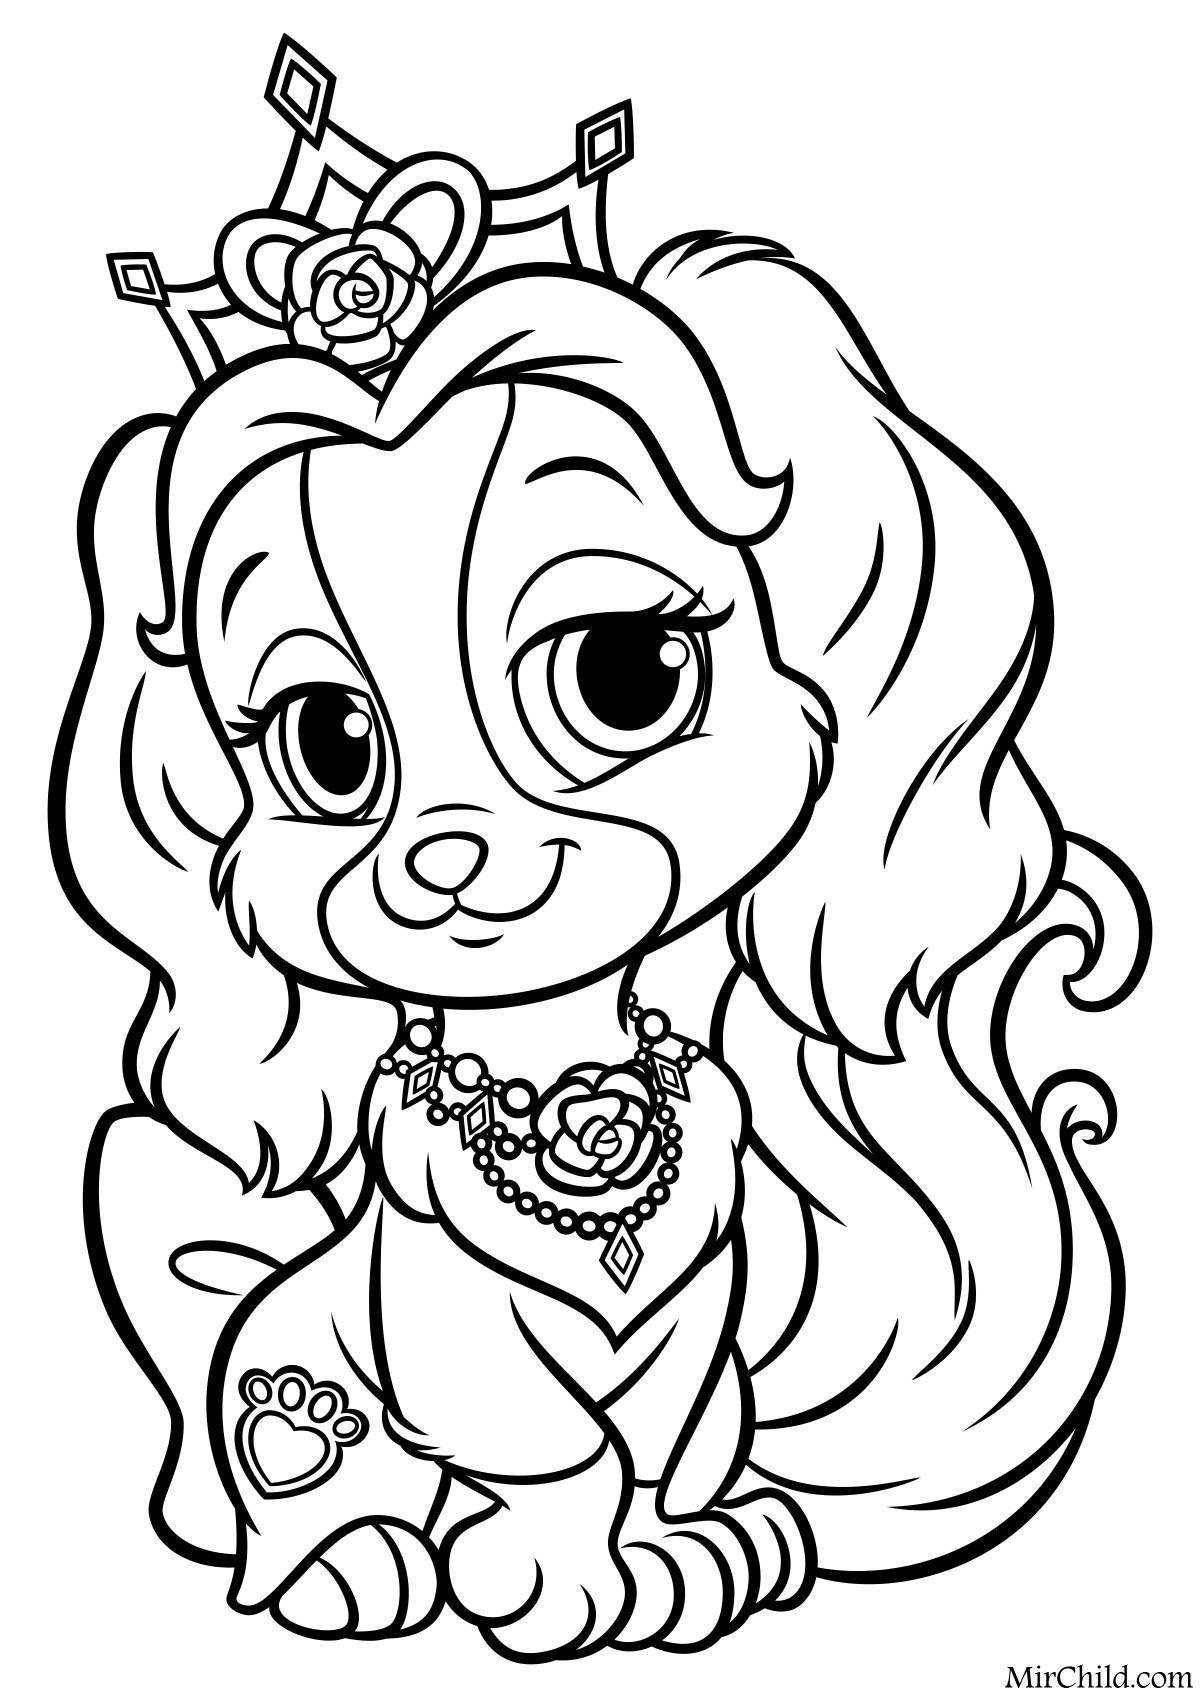 Puppy wiggly coloring page